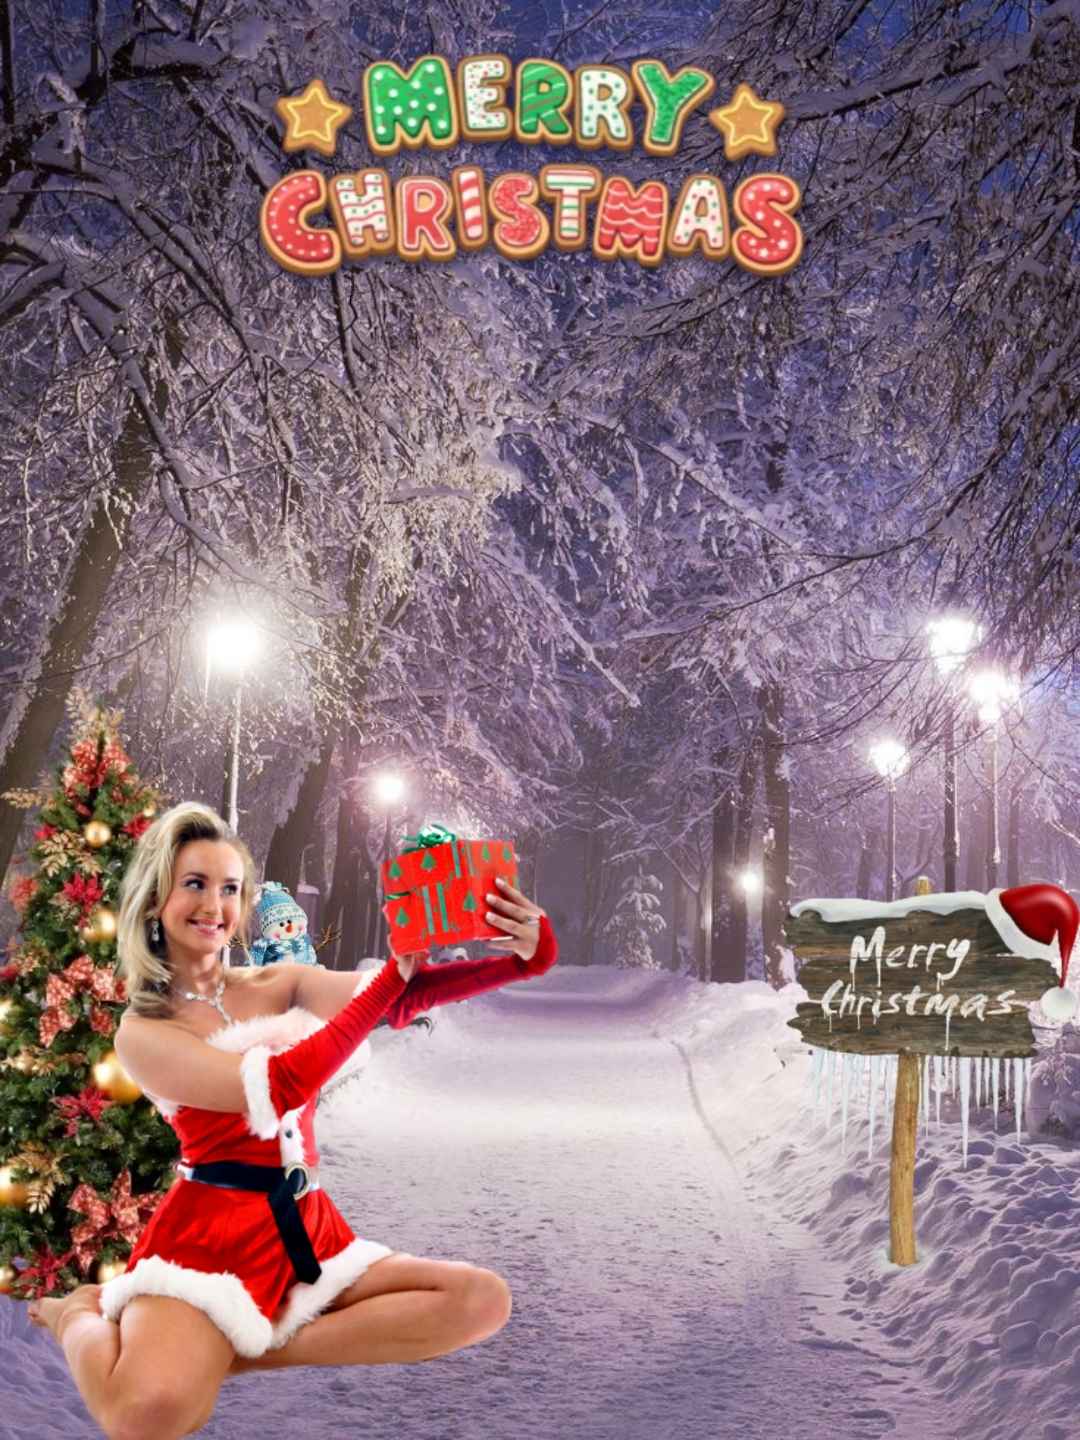 Christmas CB Hd Background With Girls For Editing